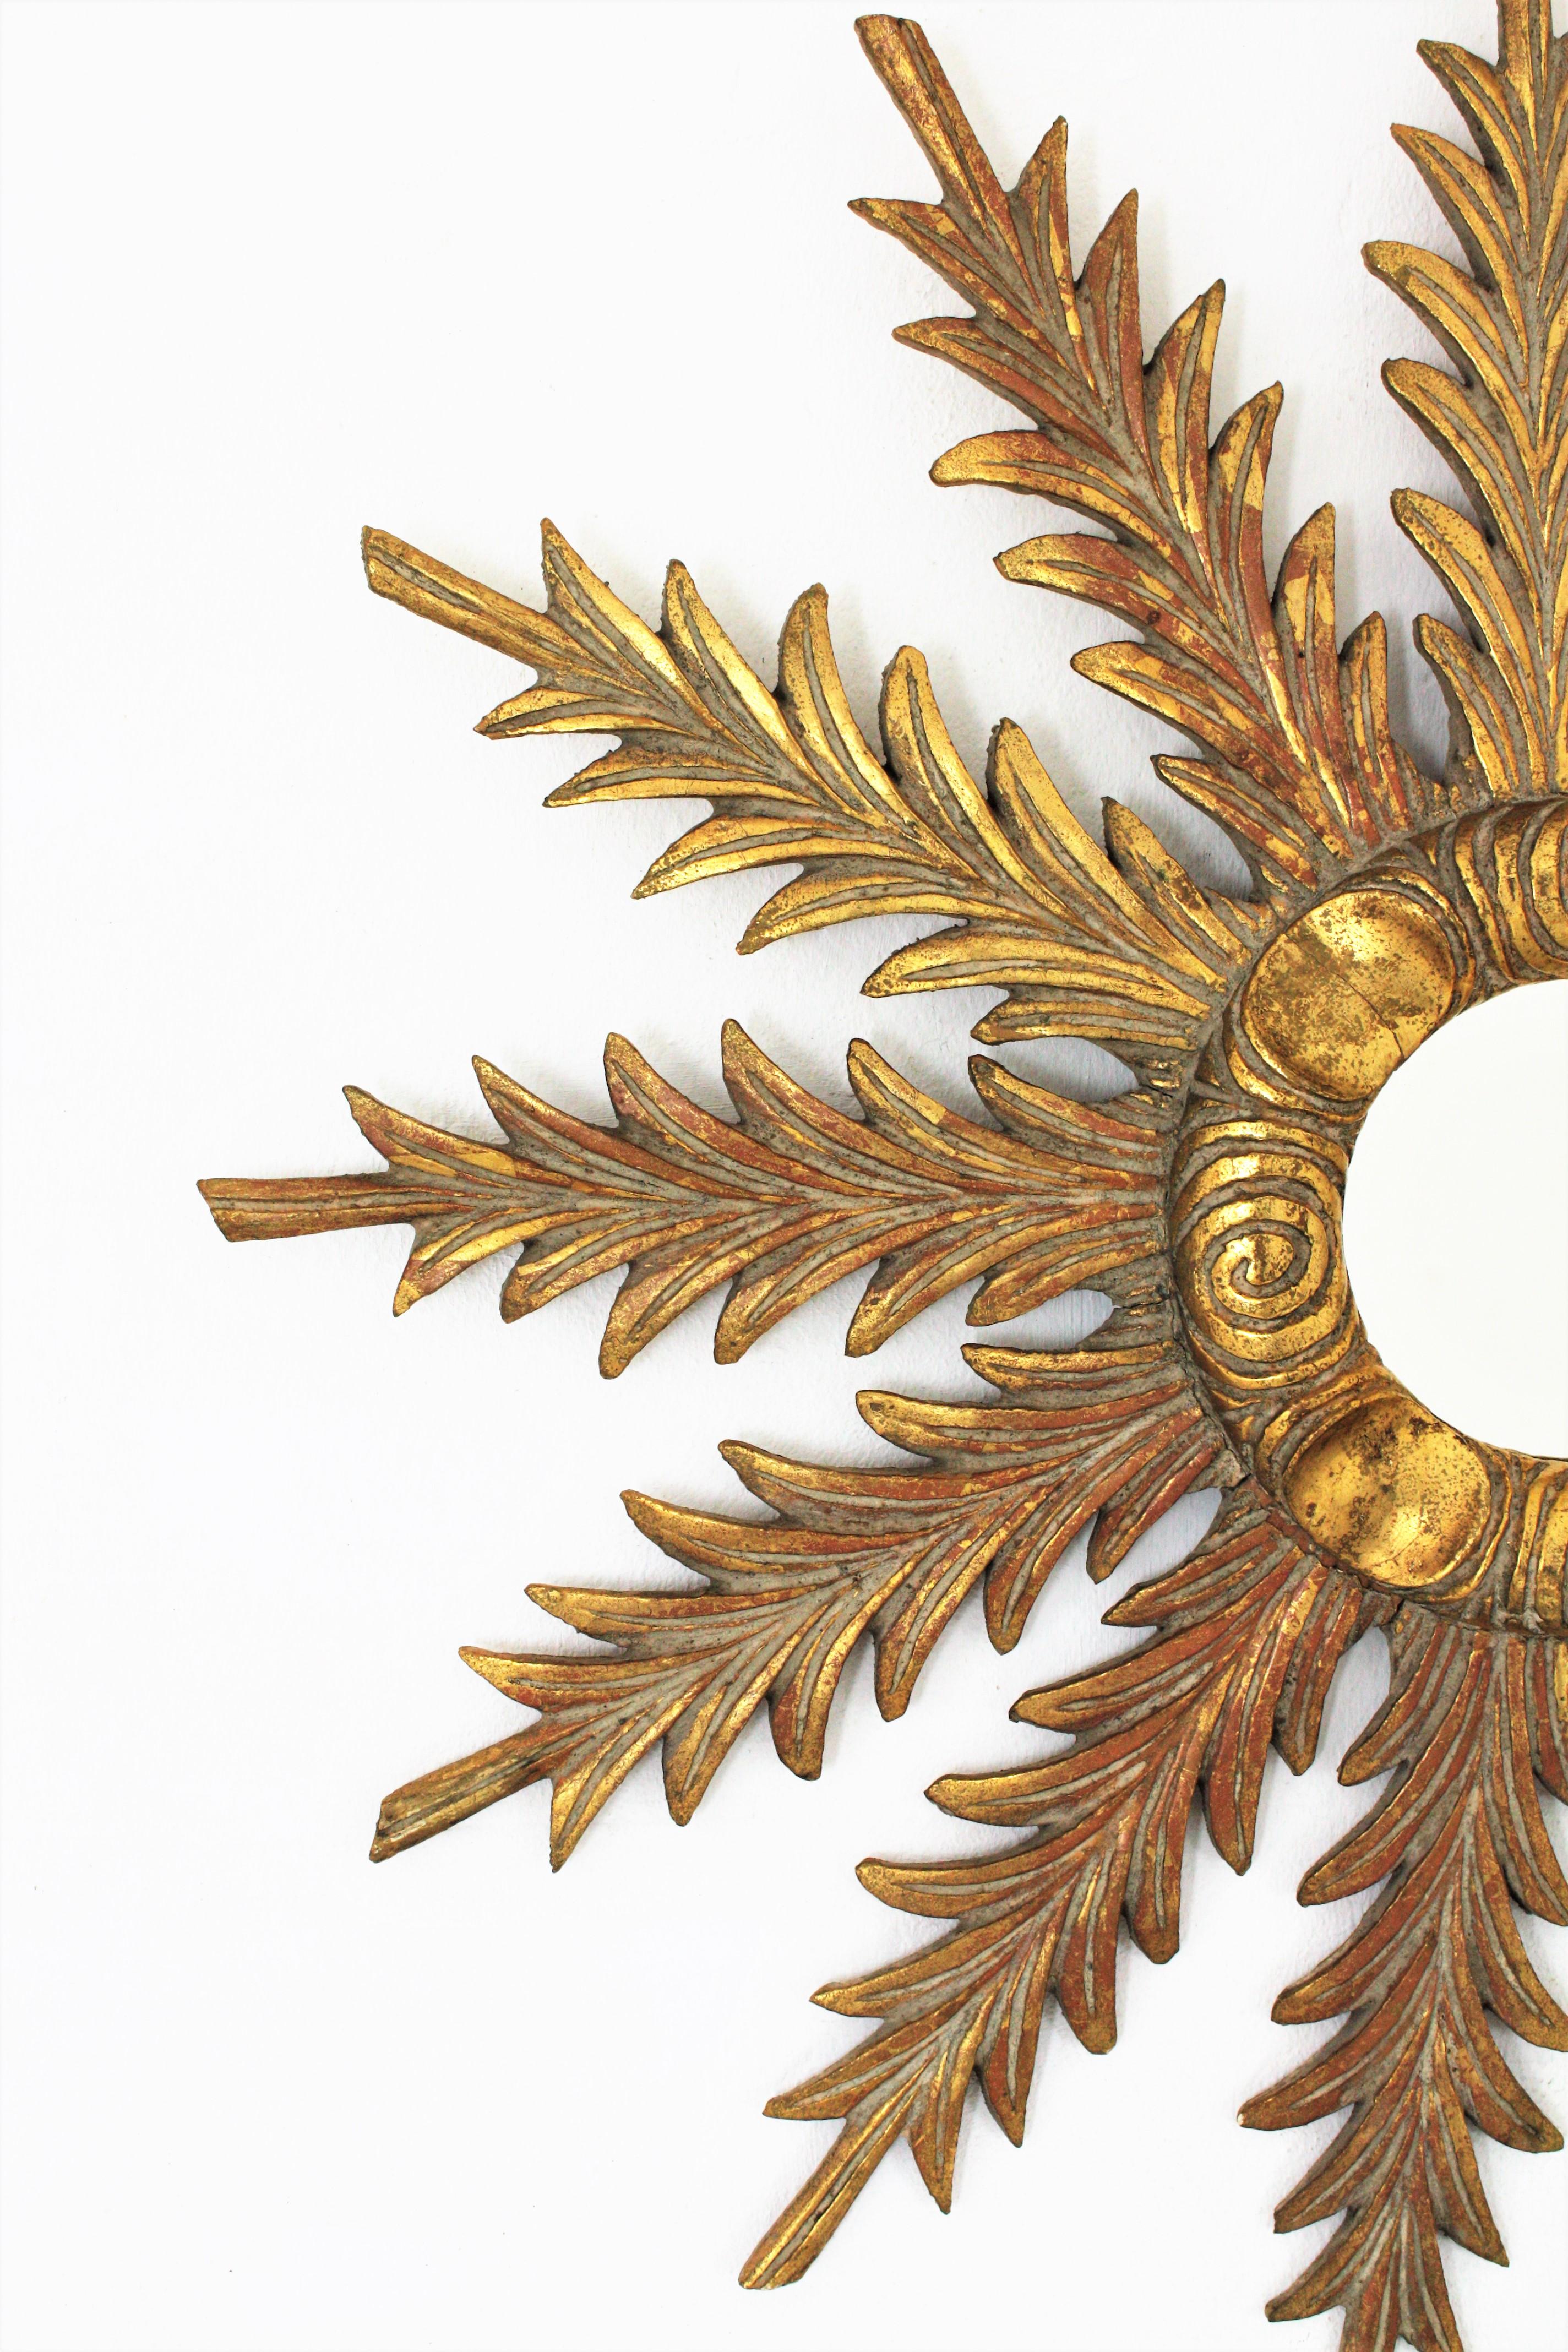 Starburst sunburst mirorr, carved wood, gold leaf,  Spain, 1930s
Elegant leafed starburst sunburst mirror combining Hollywood Regency and Baroque Style accents. The frame is richly adorned by finely carved leaves surrounding a central round mirror